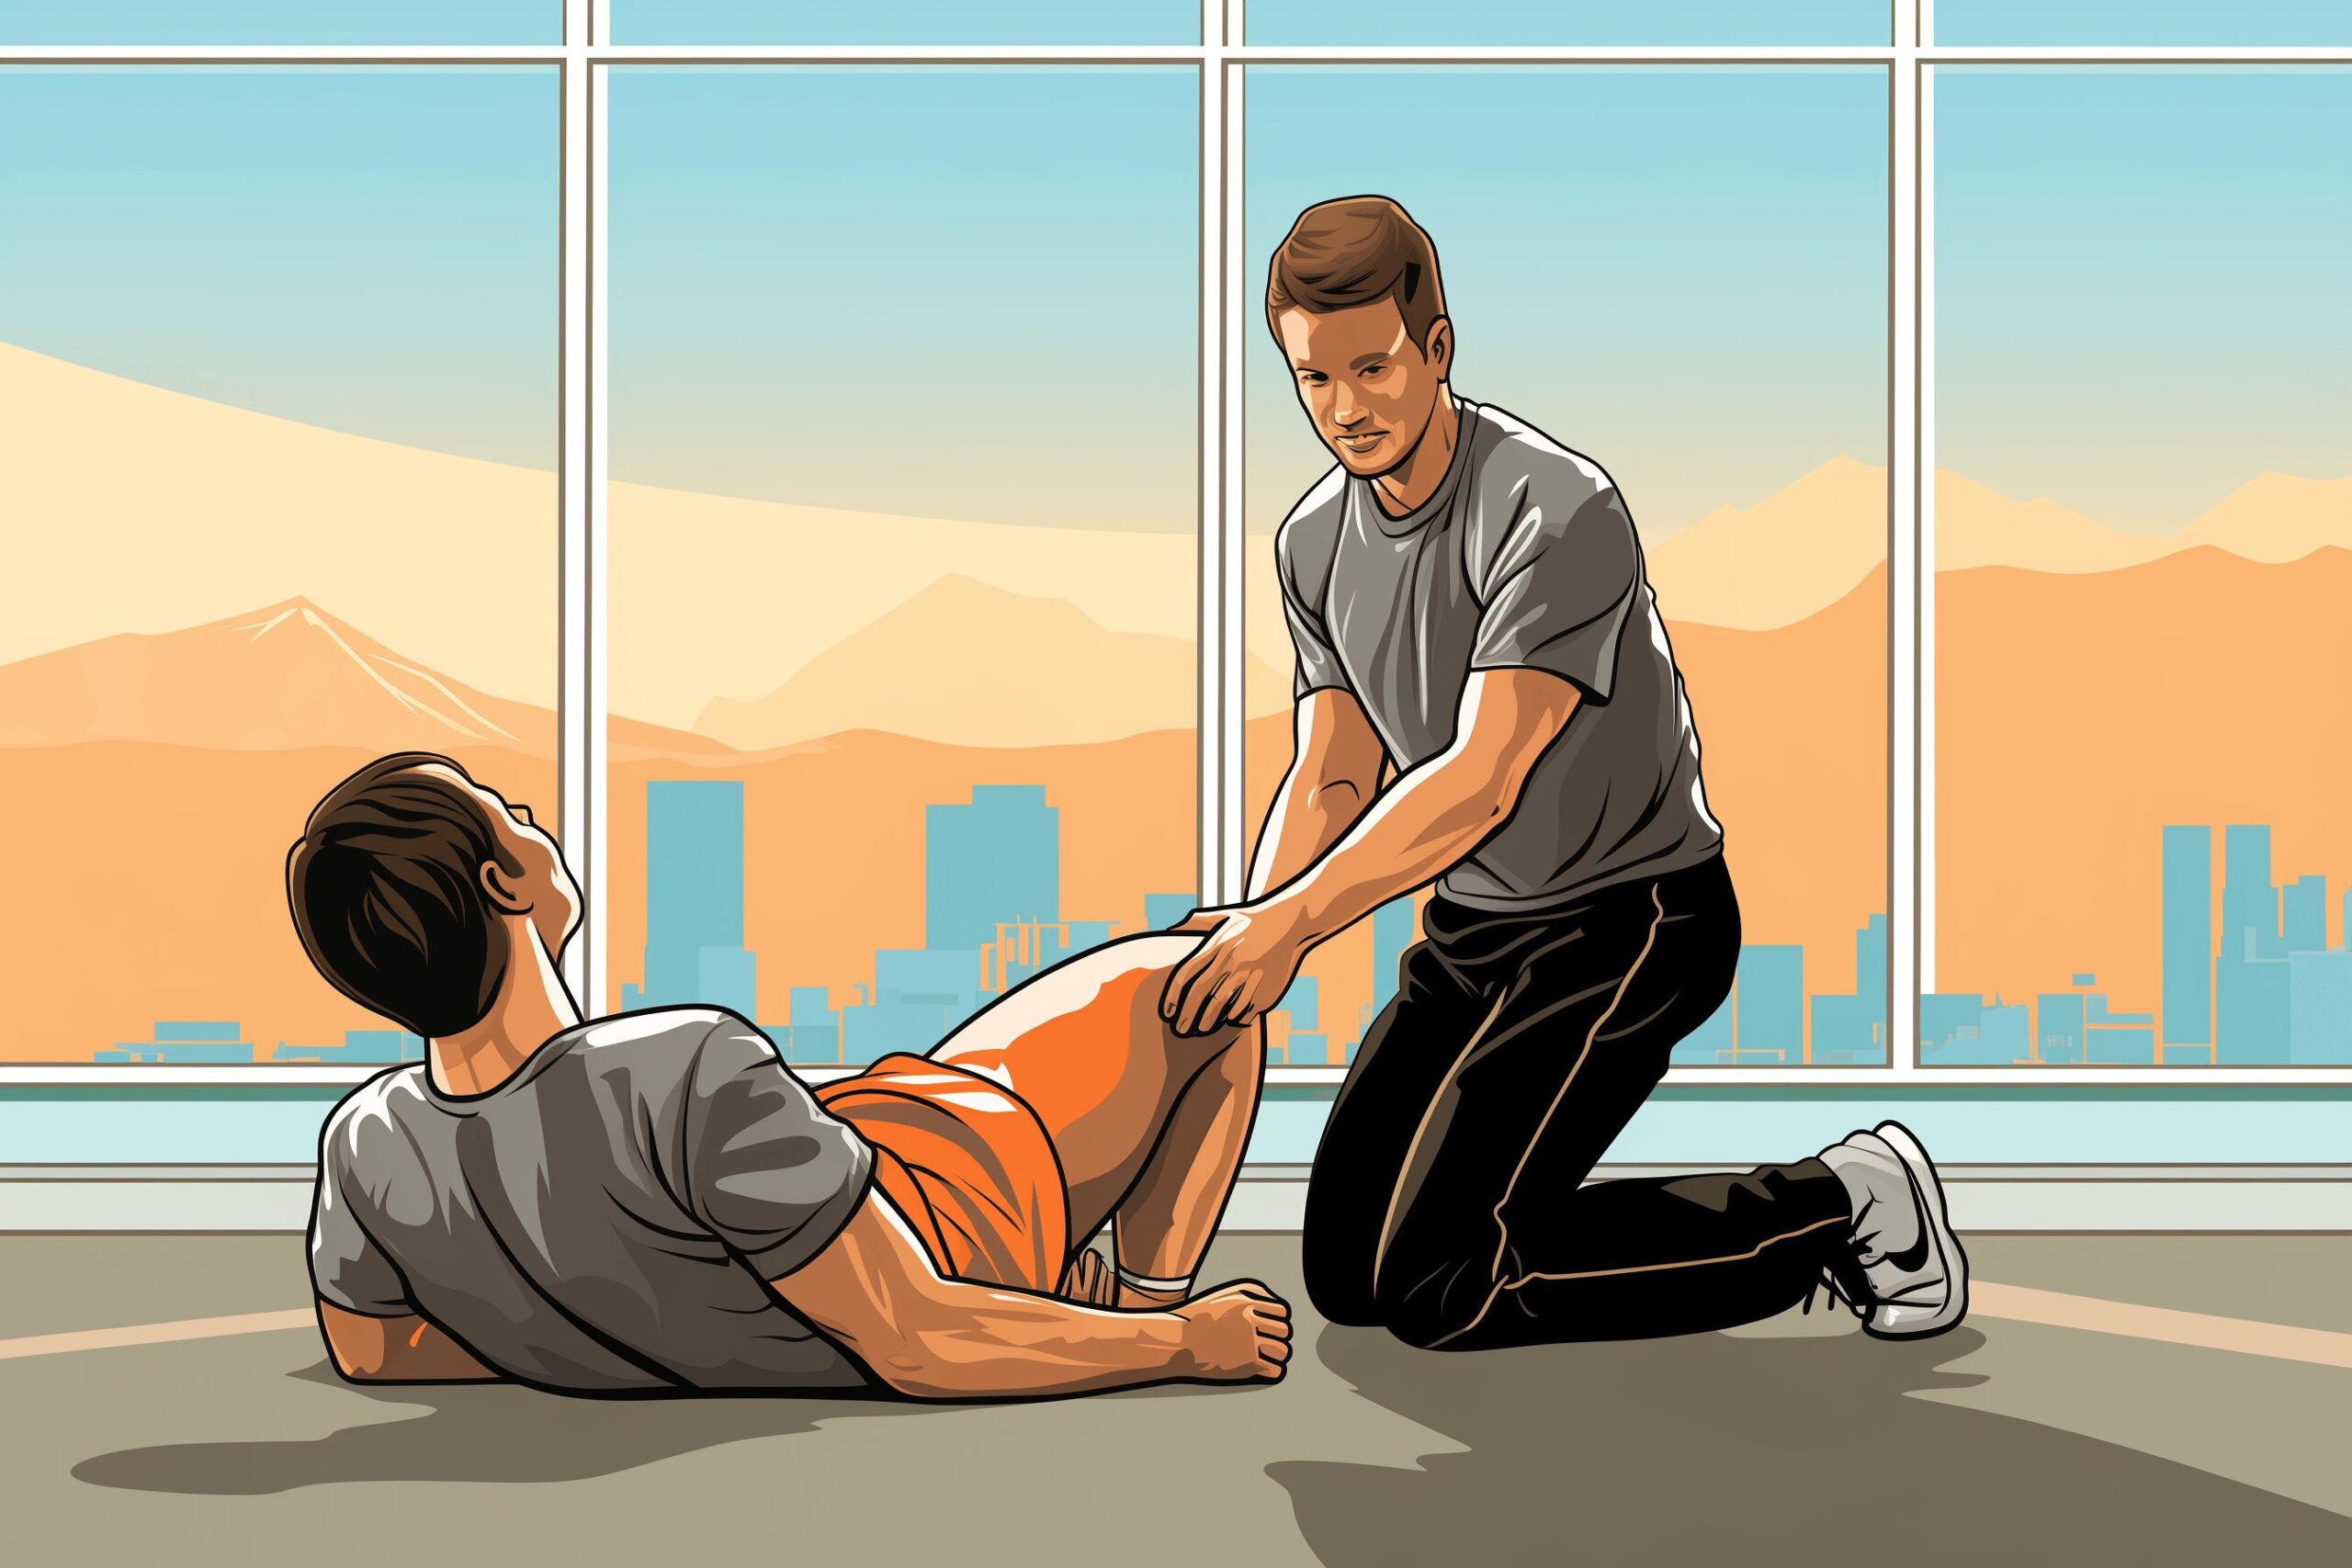 A physical therapist working on a patient